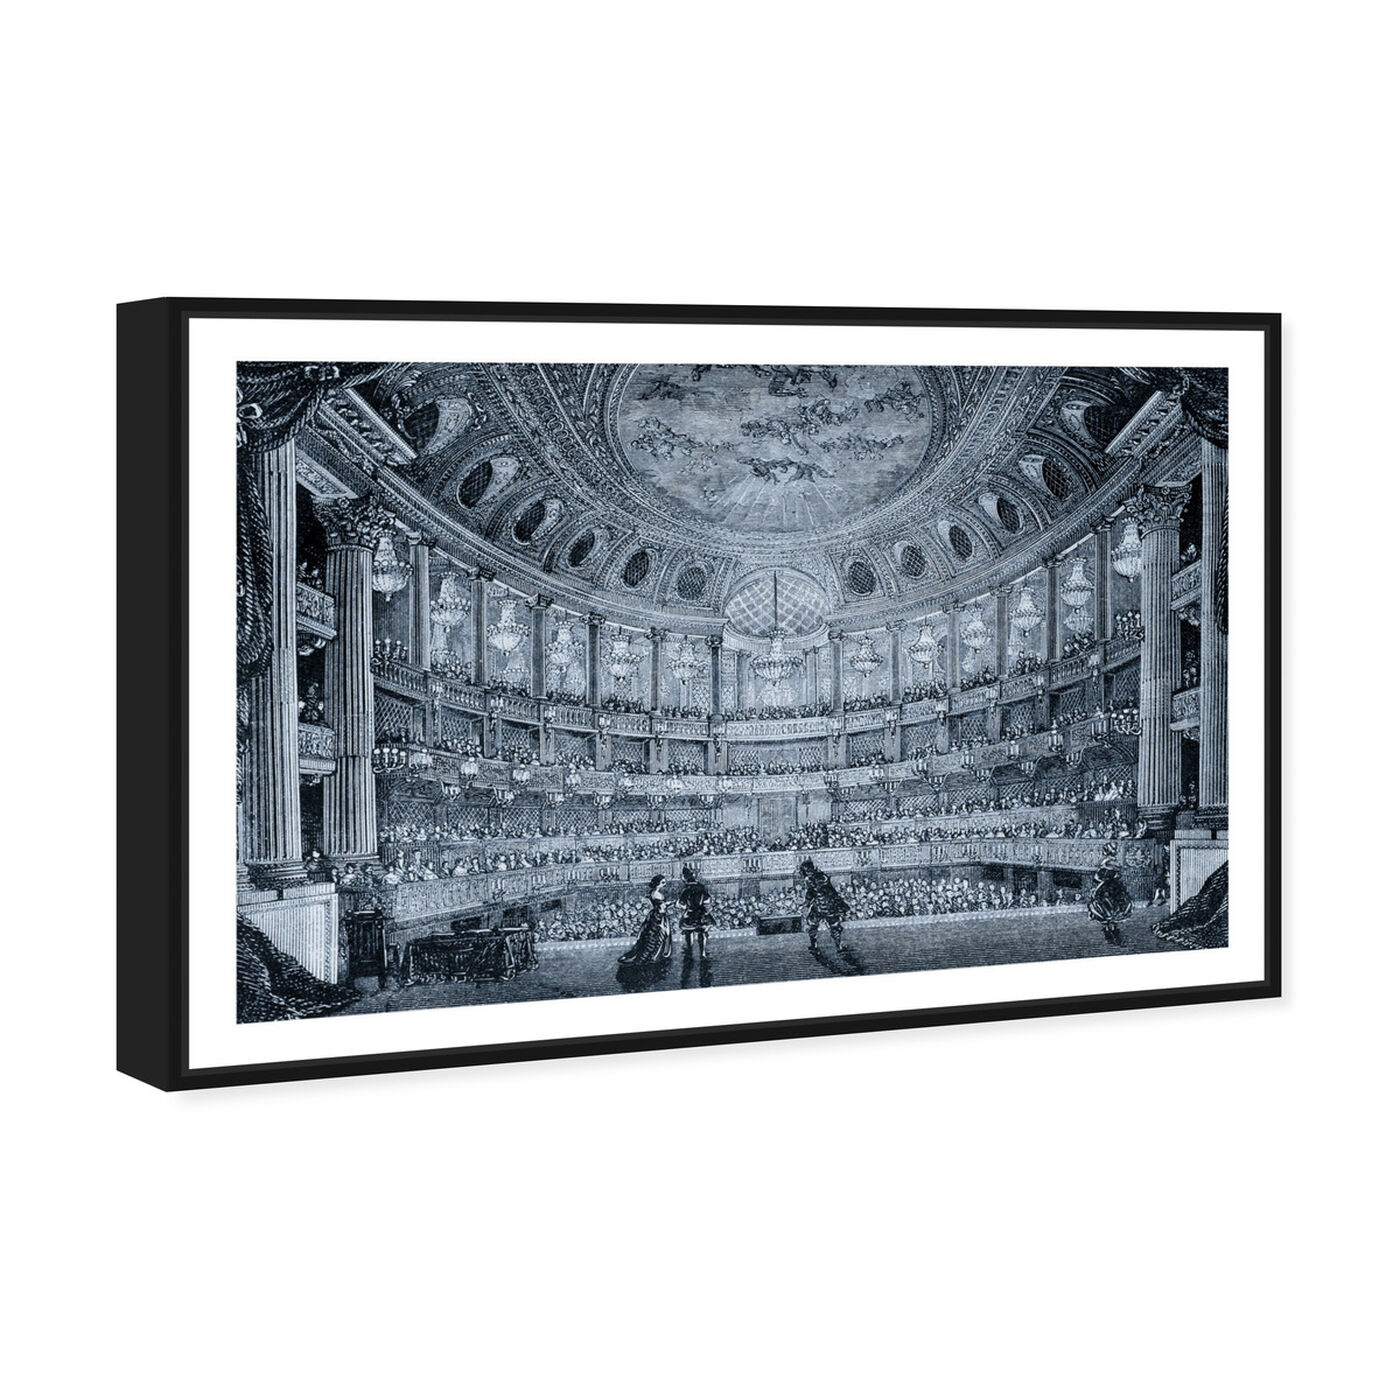 Angled view of Royal Opera of Versailles 1850 Engraving featuring architecture and buildings and european buildings art.